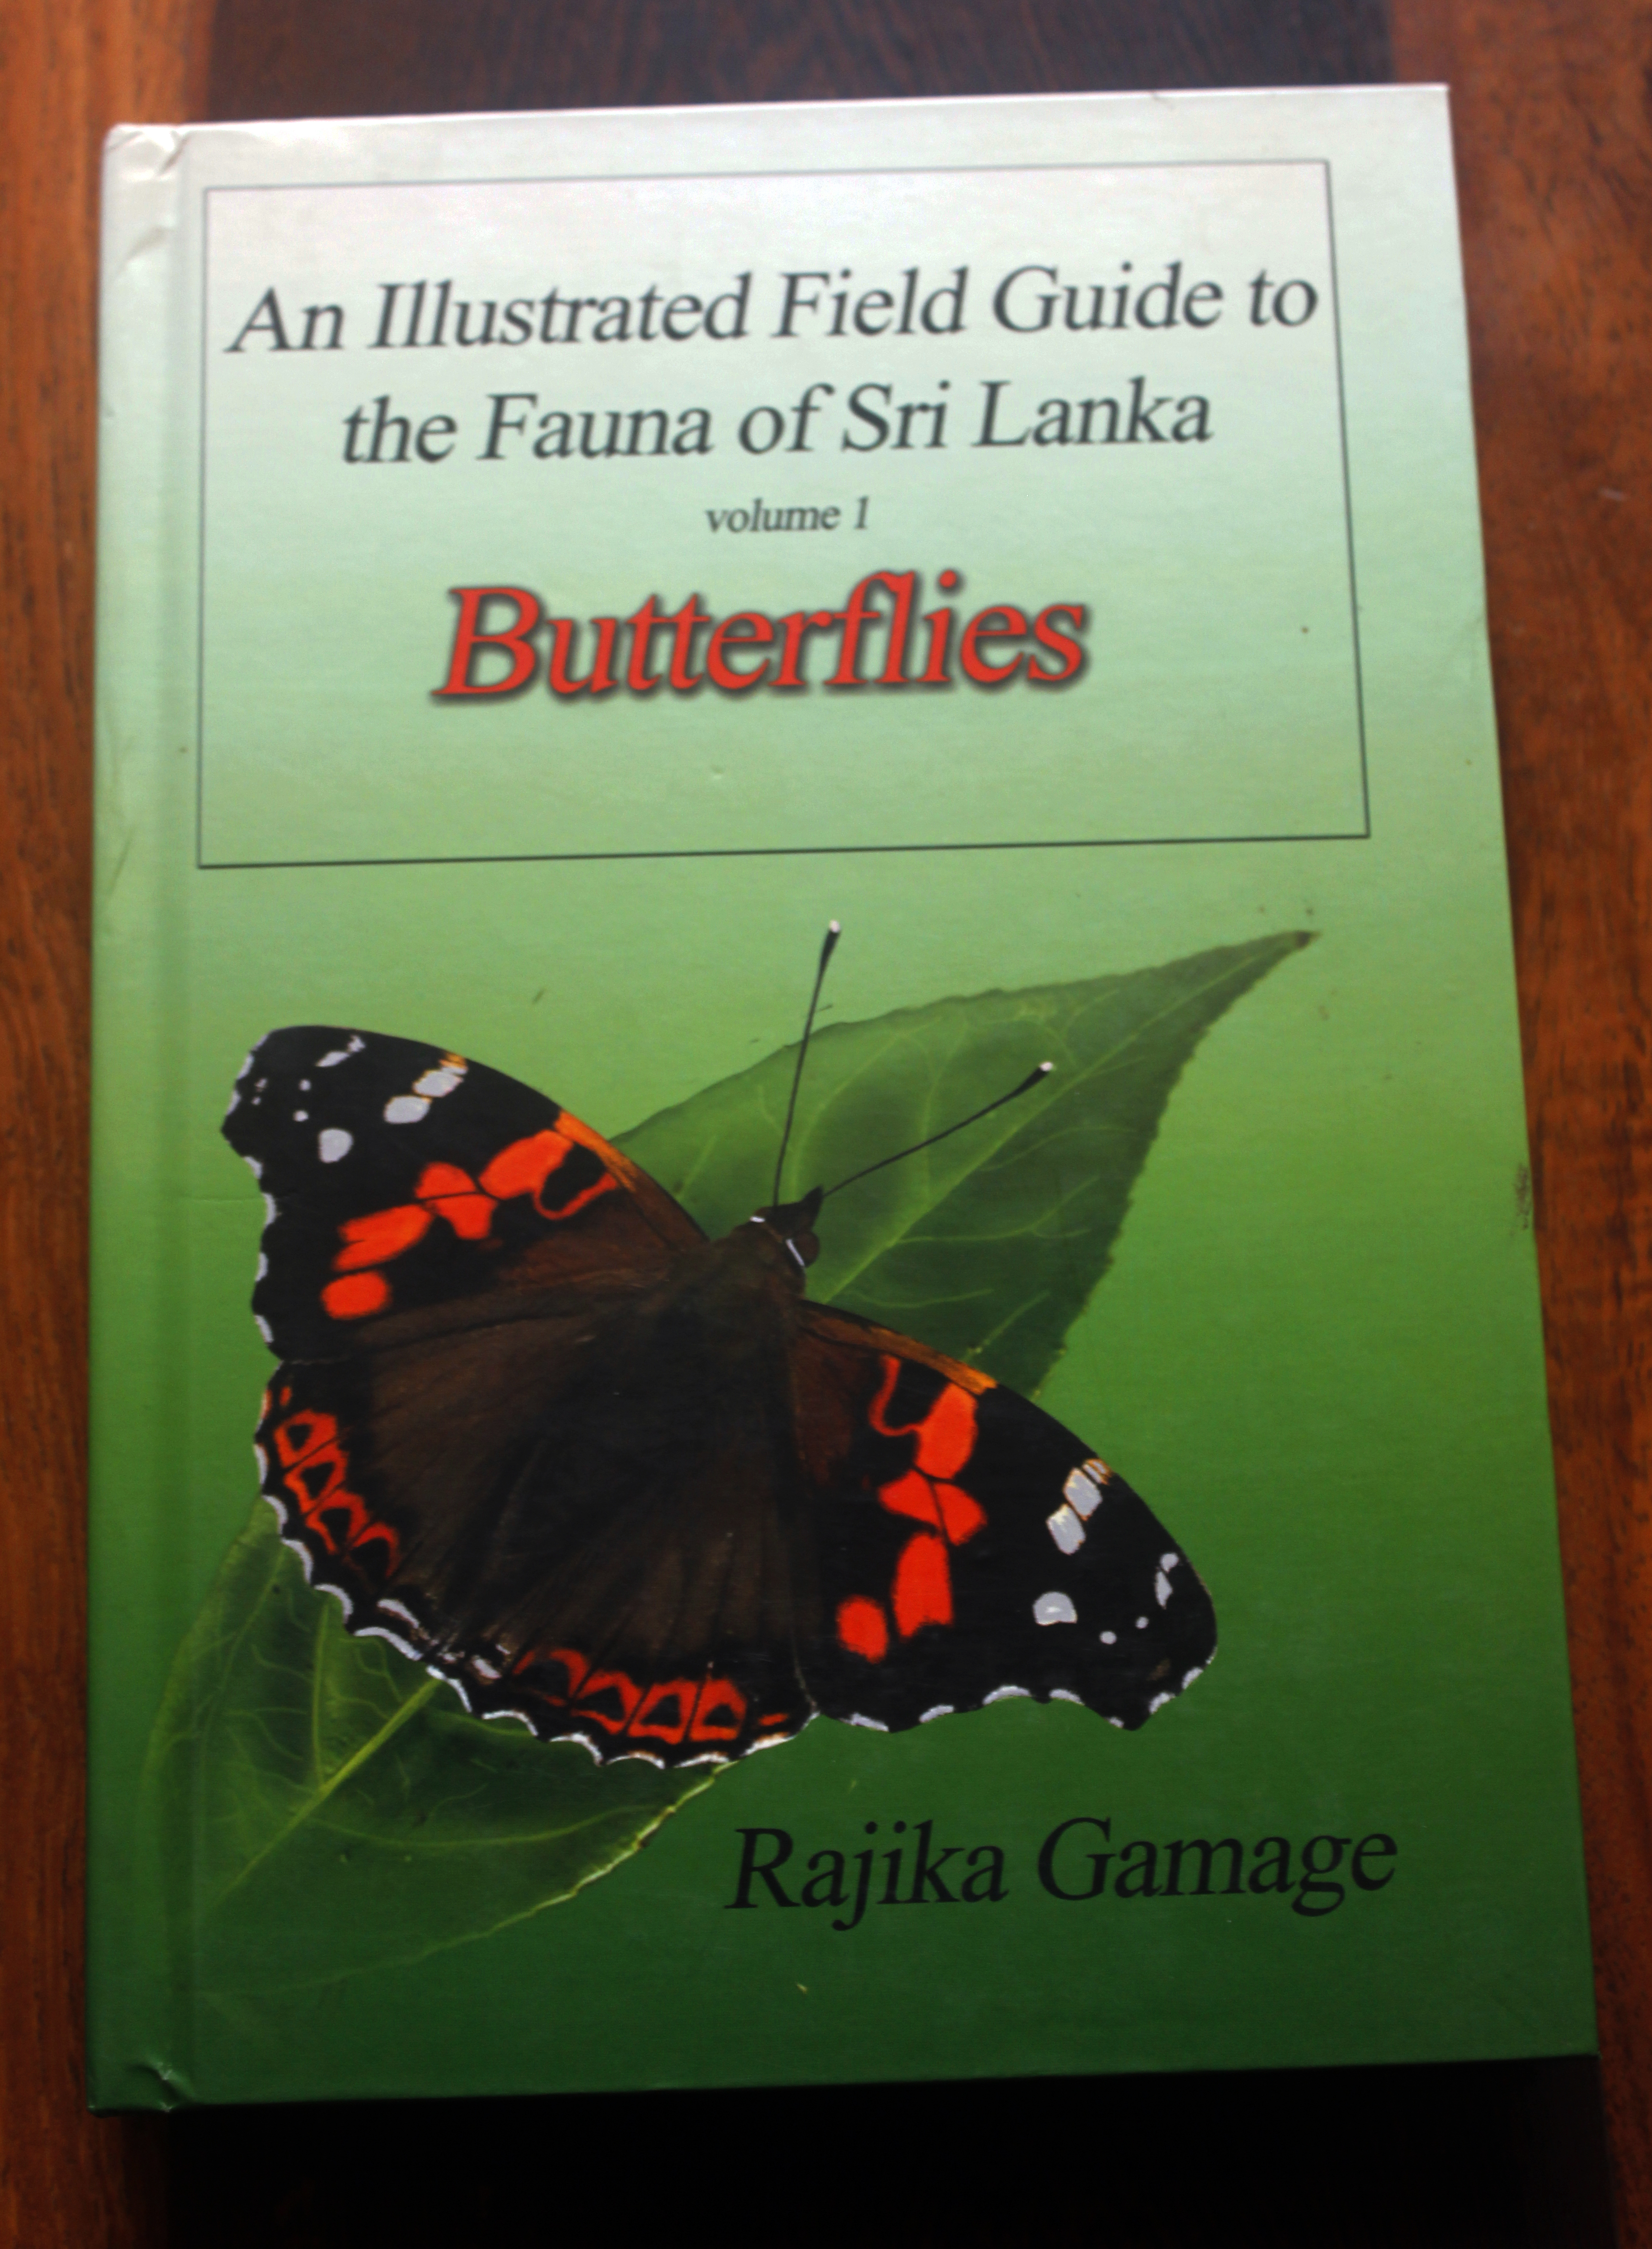 An Illustrated Field Guide to the Fauna of Sri Lanka Volume 1 Butterflies